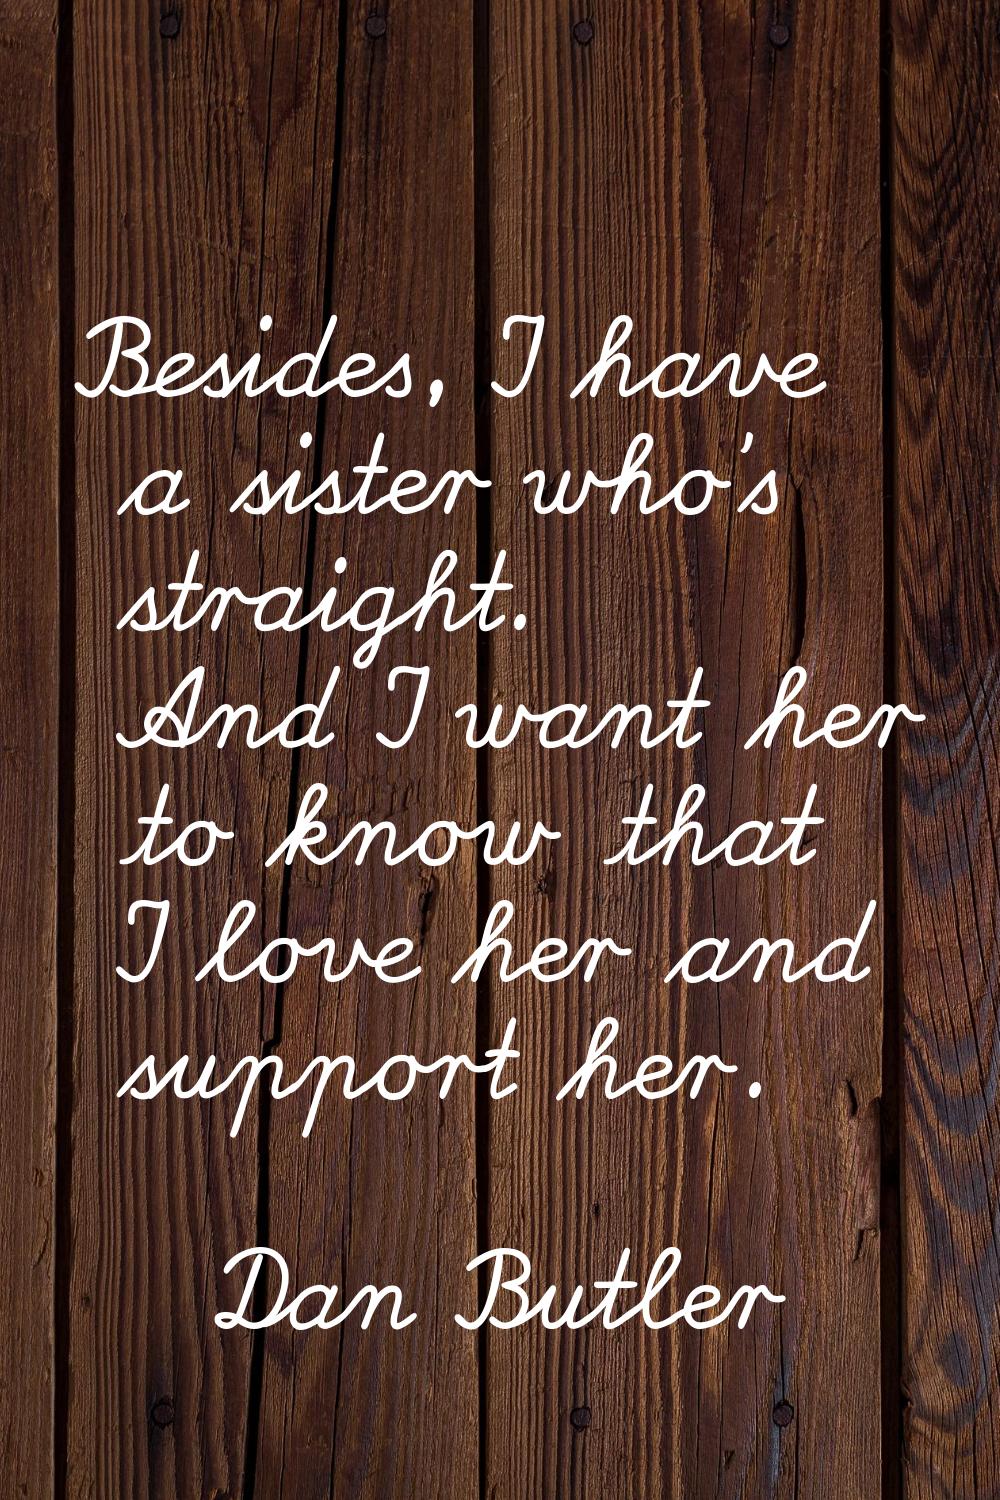 Besides, I have a sister who's straight. And I want her to know that I love her and support her.